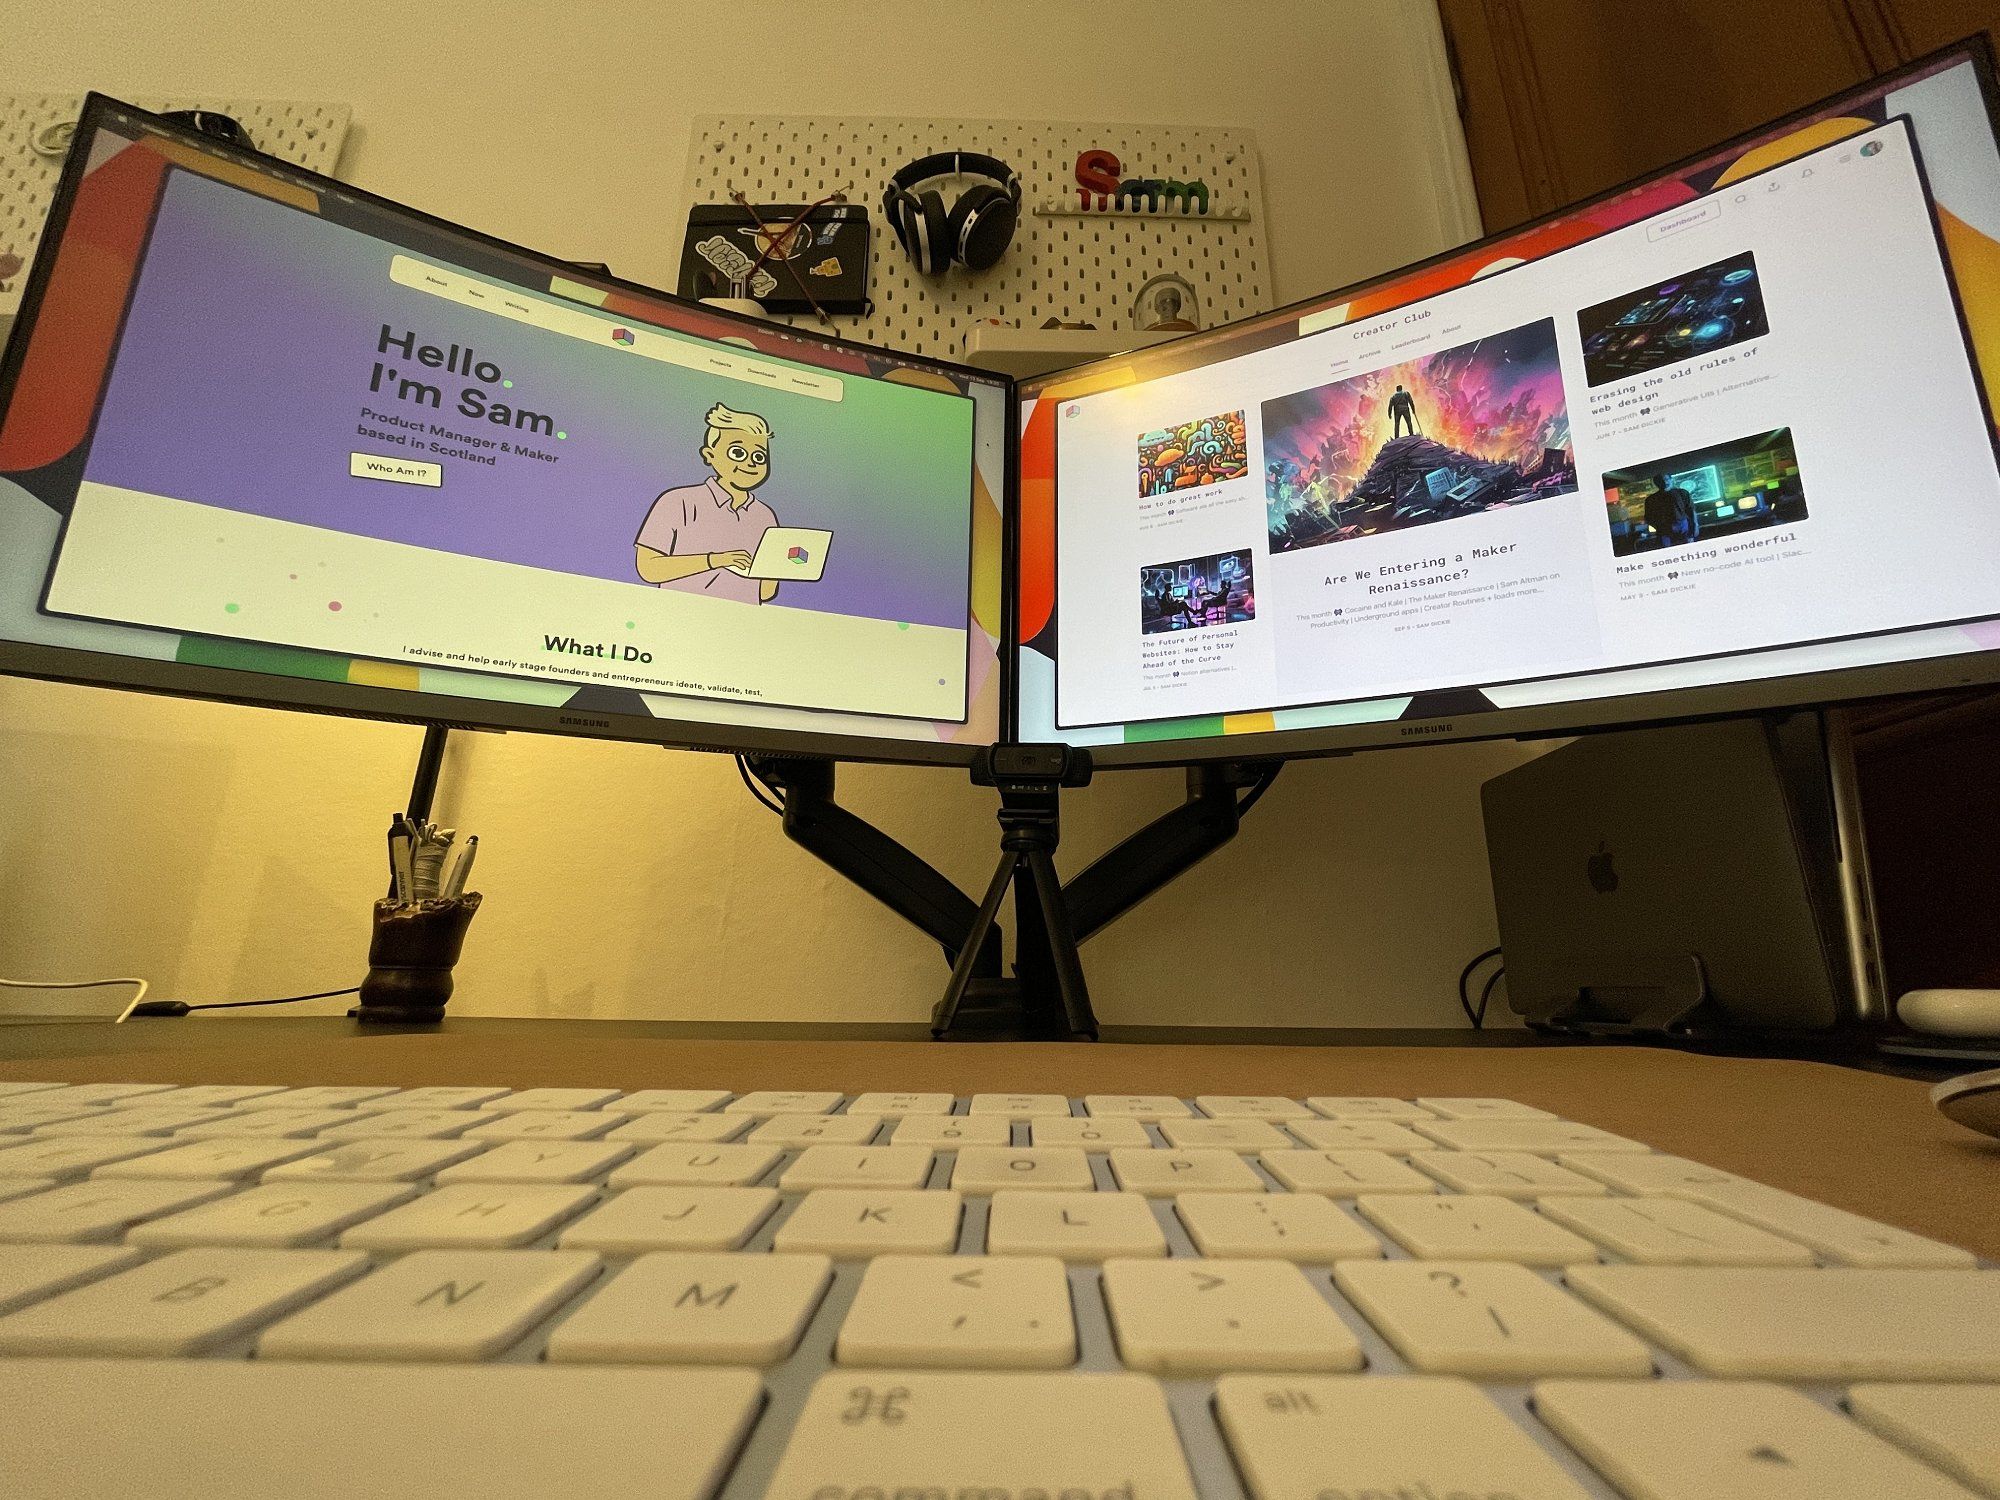 A wide angle shot of an Apple Magic keyboard and two Samsung monitors